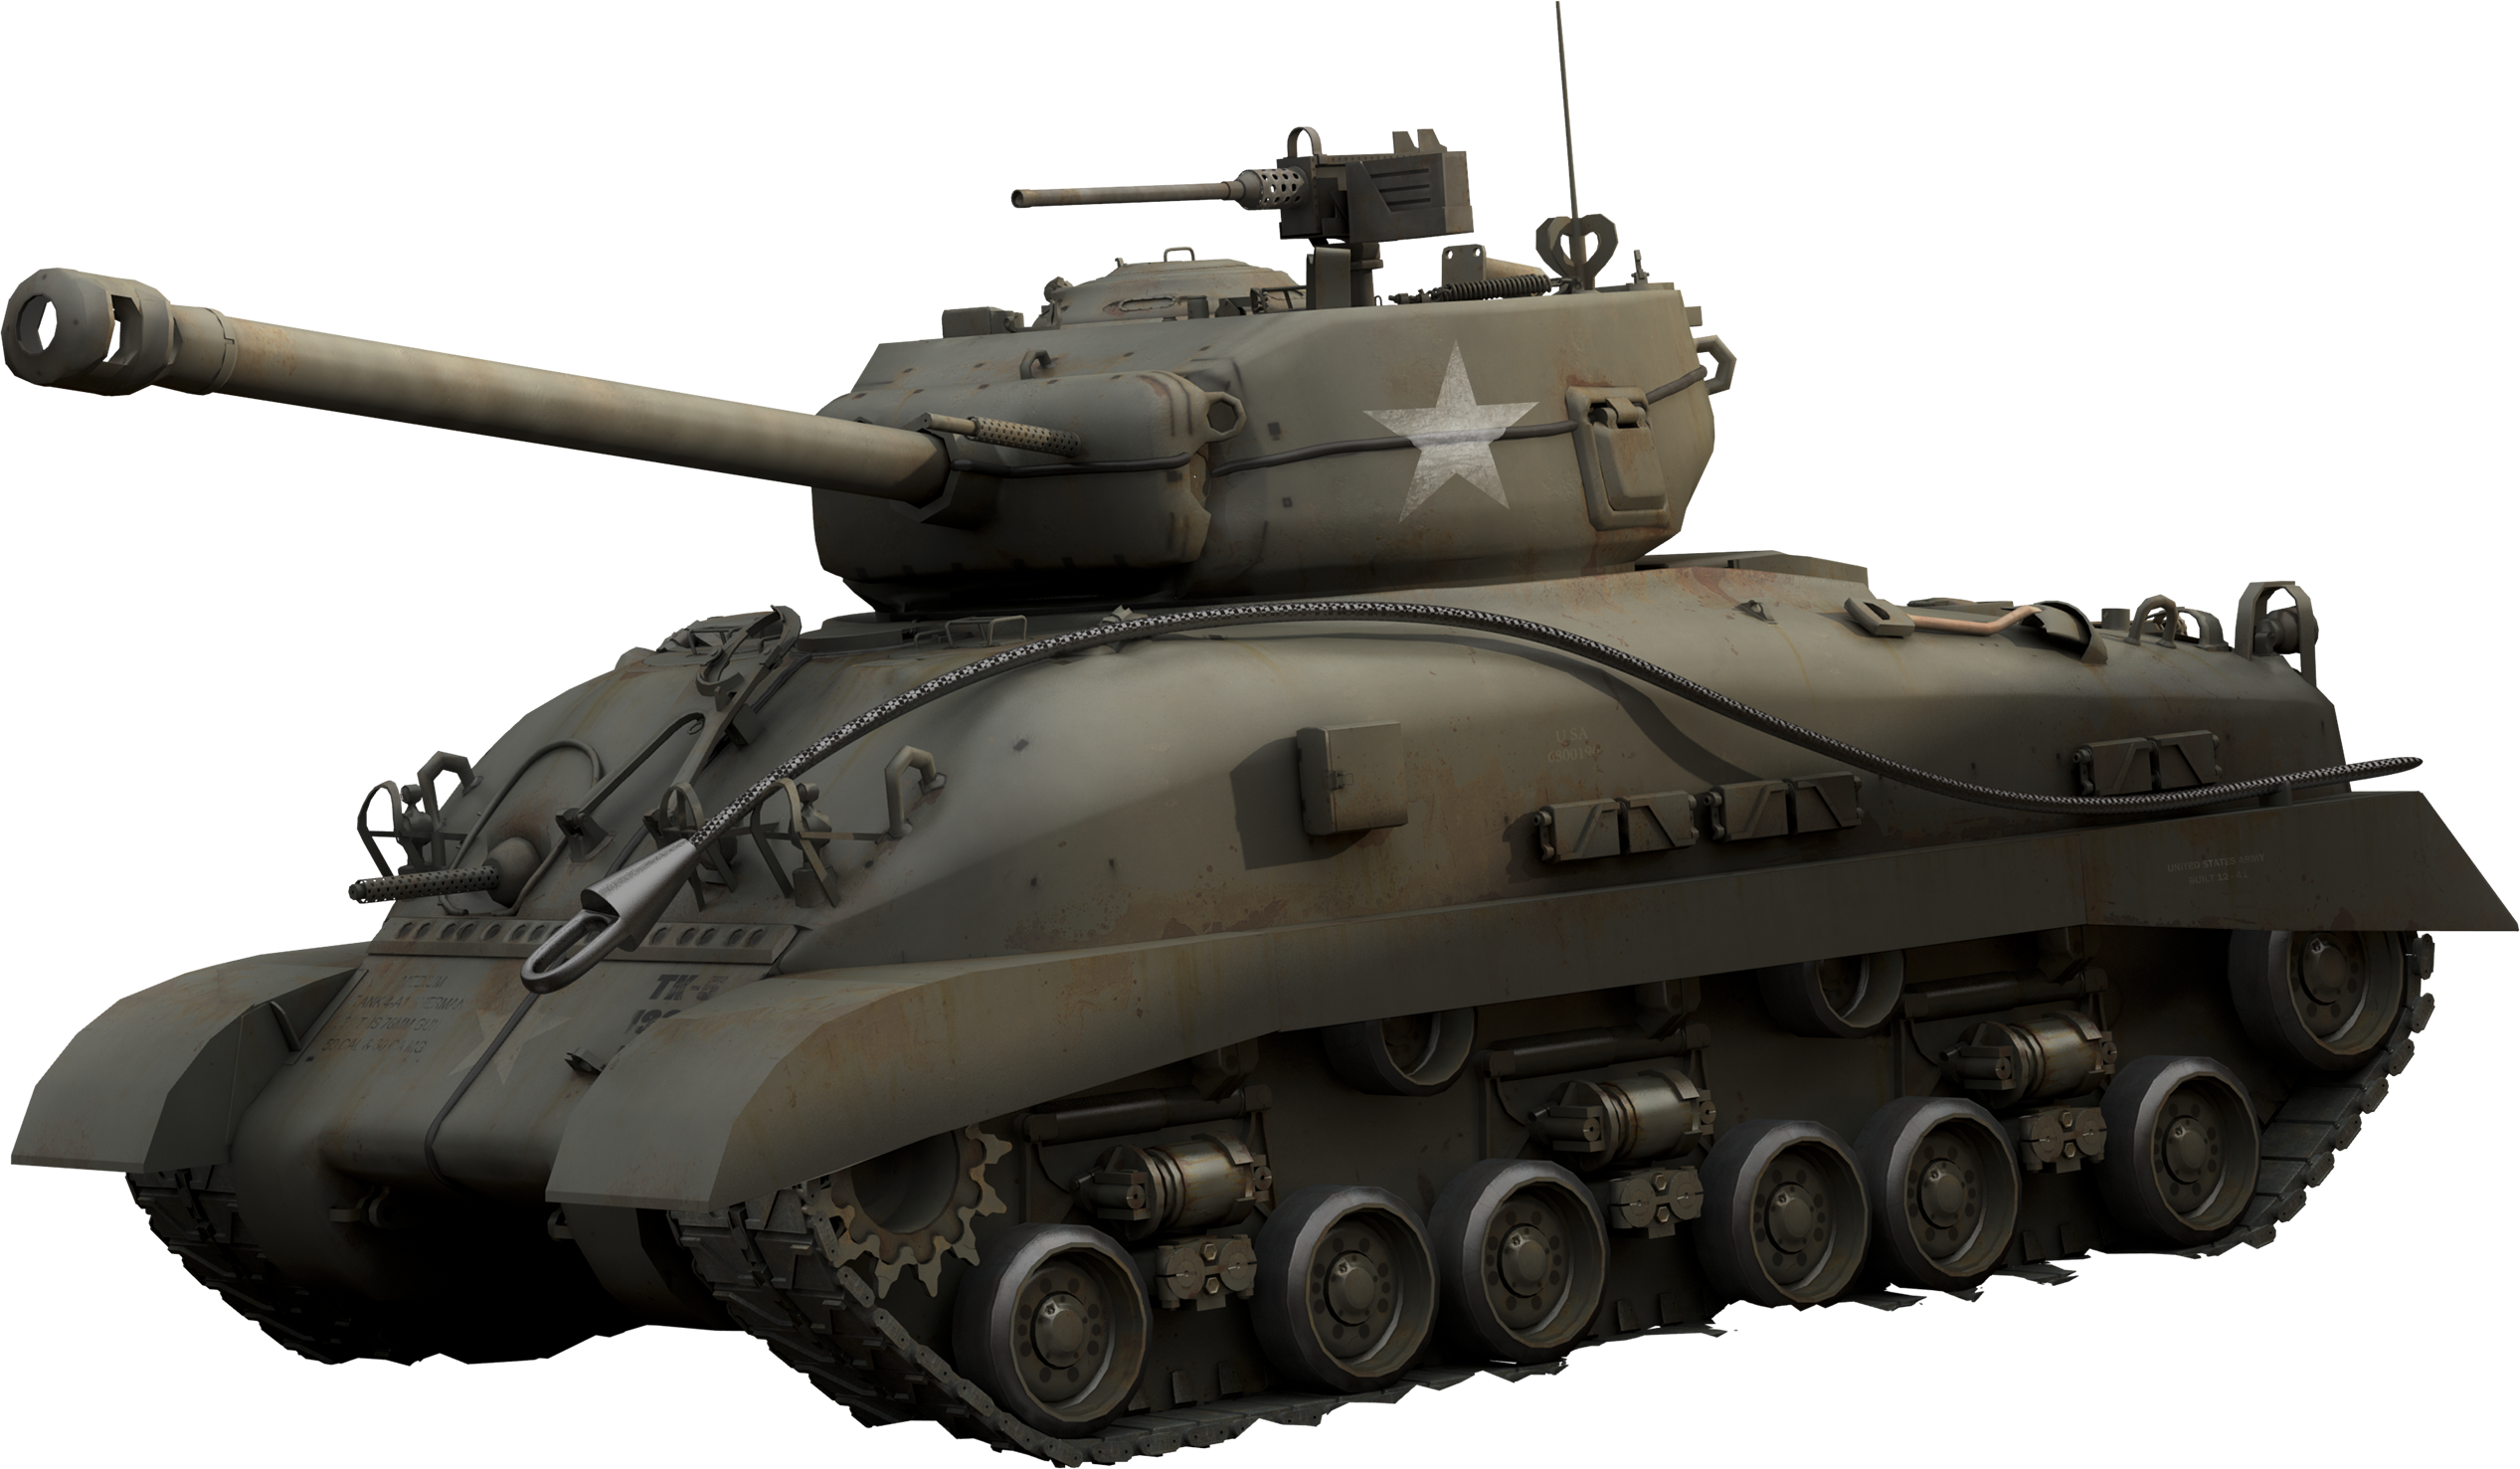 US tank PNG image, armored tank